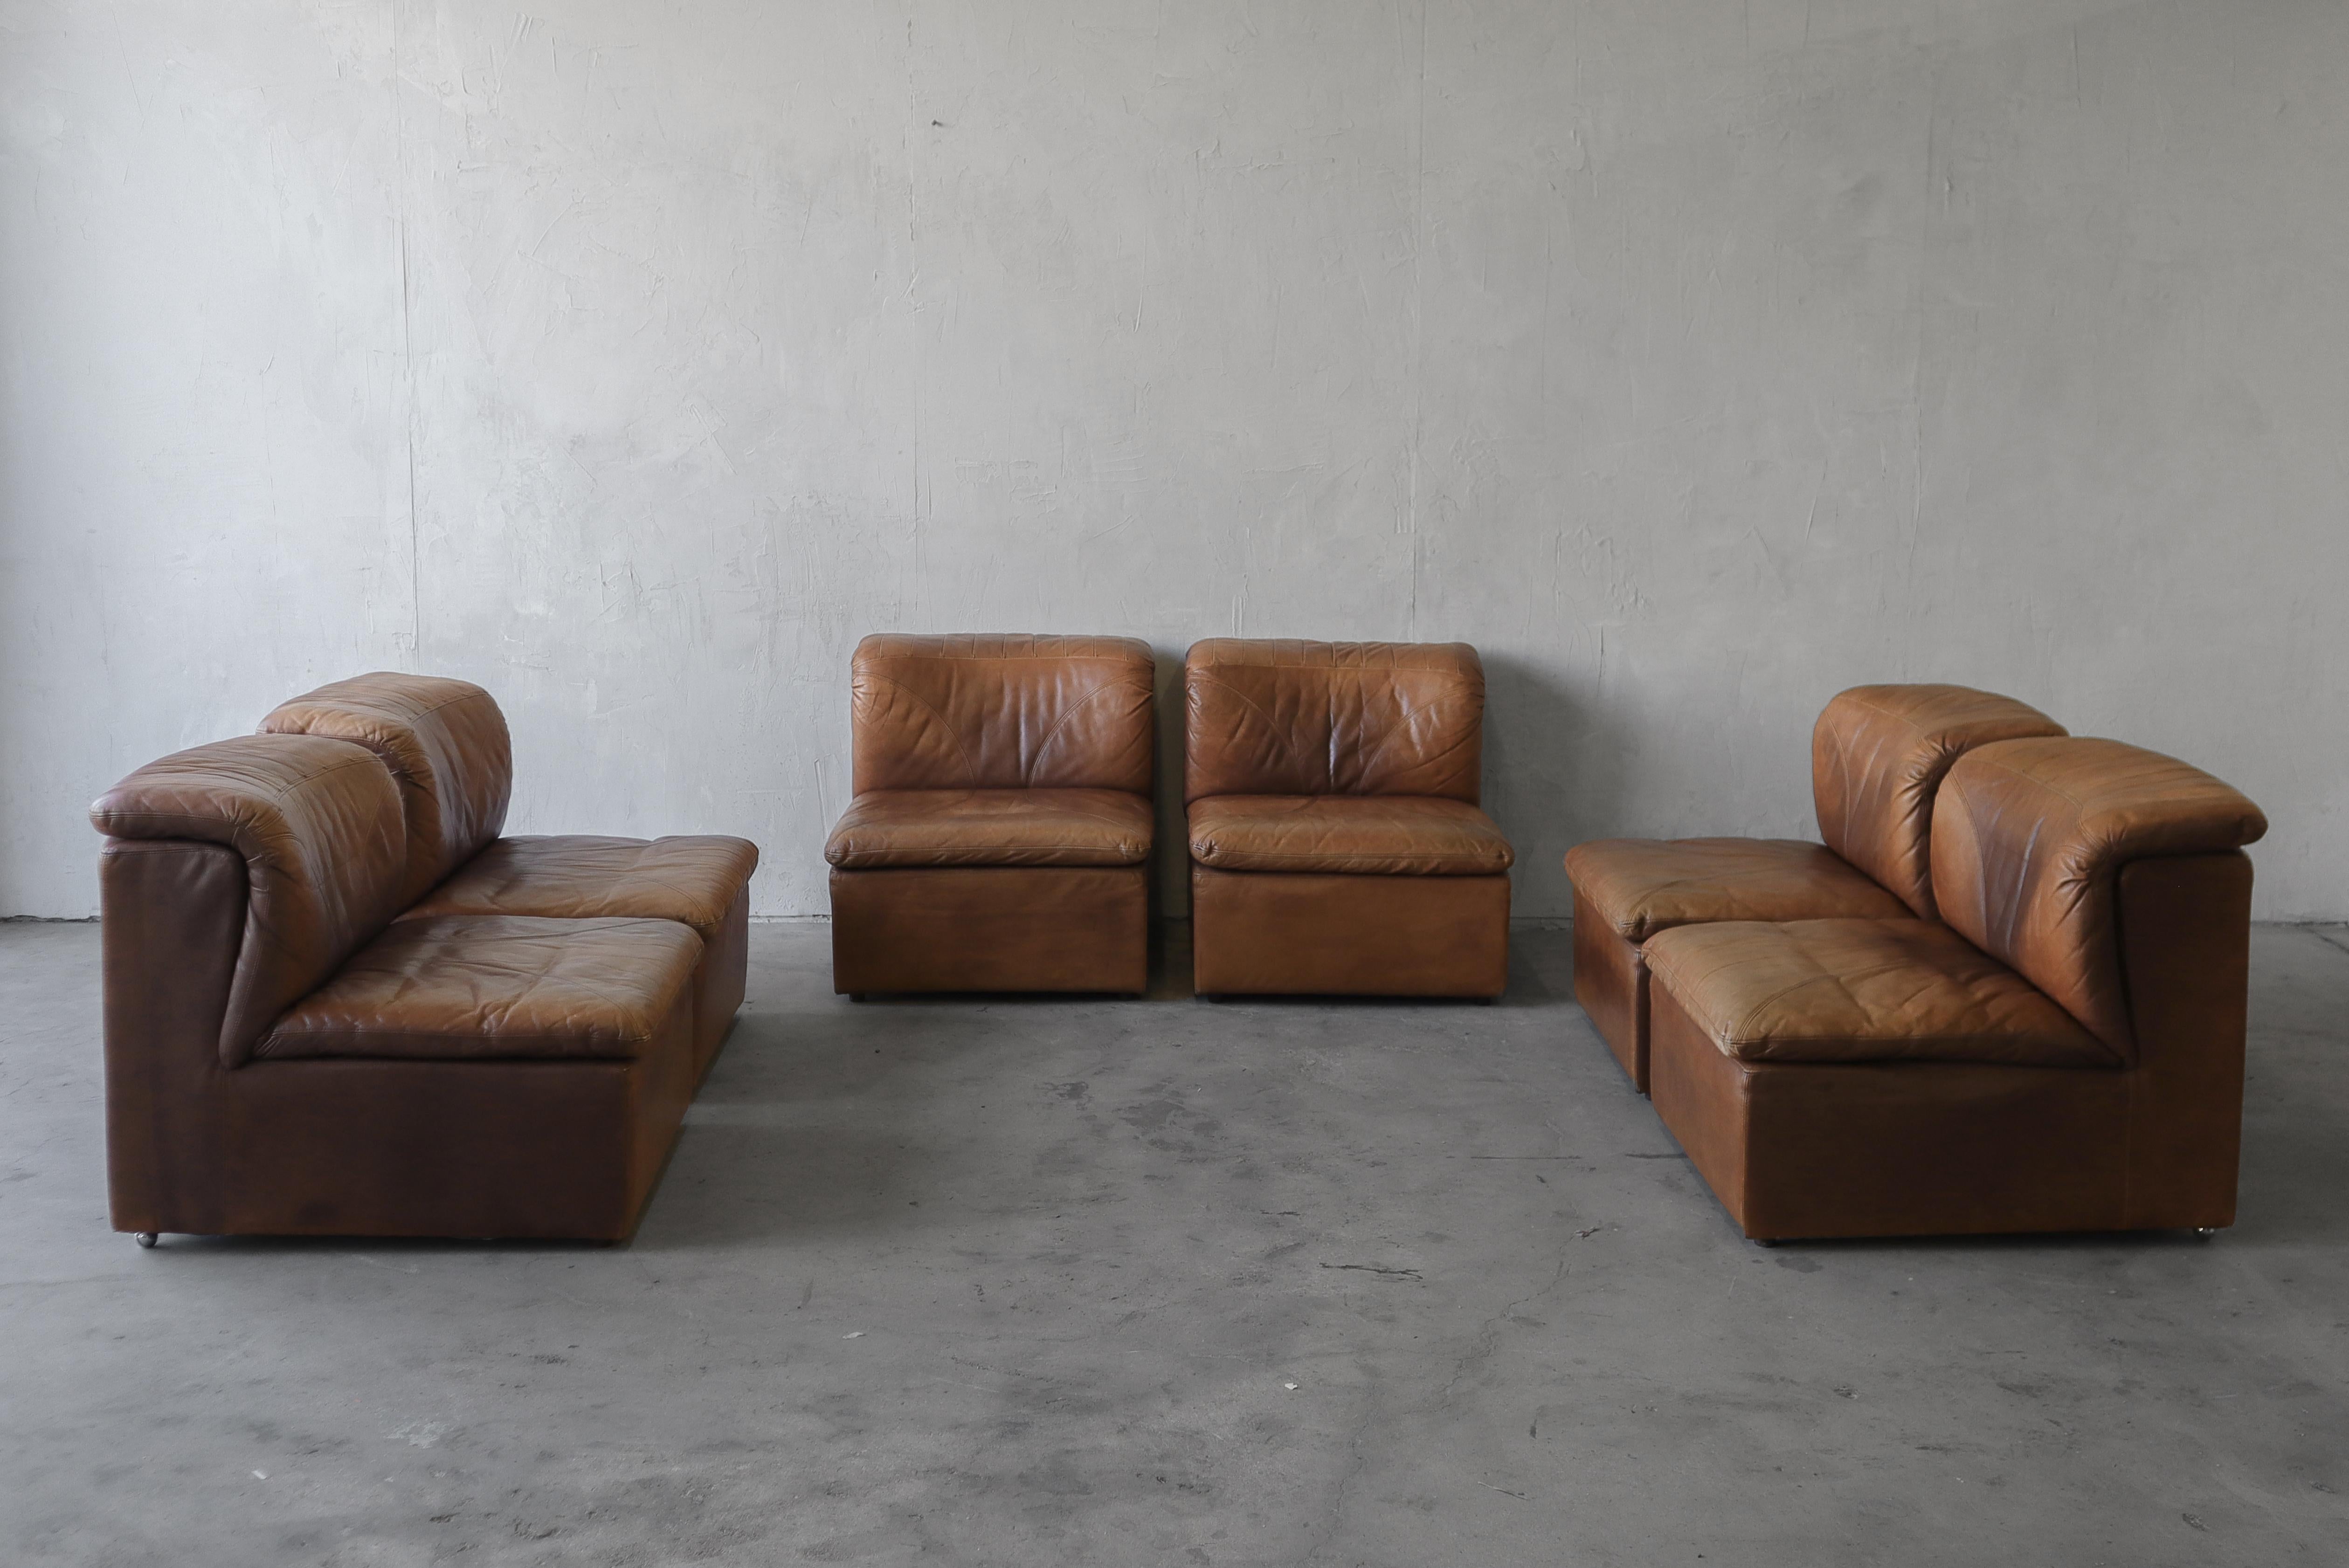 This 6-Piece, modular sectional sofa by De Sede is 1970s, patinated leather perfection. The options for this set are truly endless. Use it as one long sofa, 2 matching 3 seat sofas, a 4 seat sofa and 2 chairs. 6 chairs, and the list goes on.

To